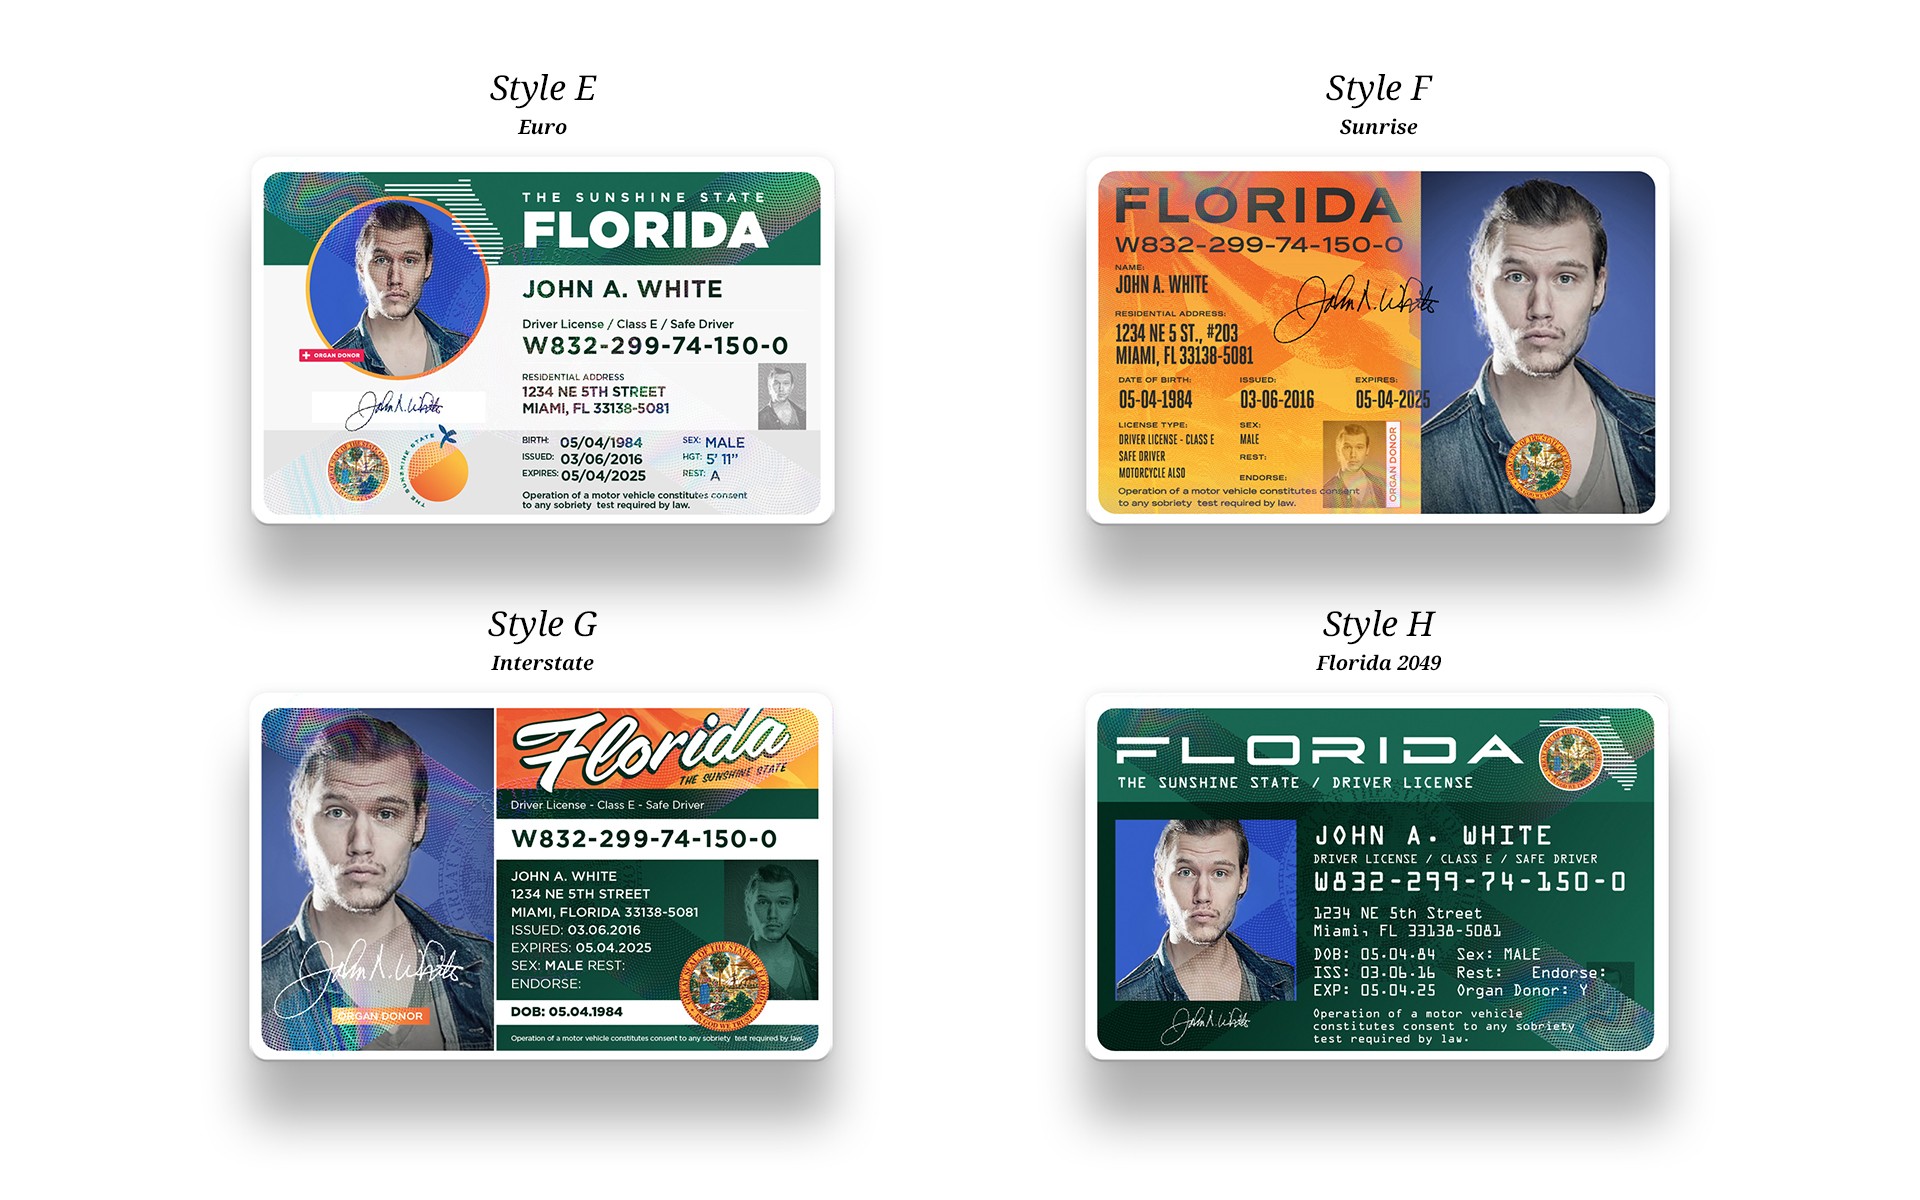 Florida driver's license gets a new look